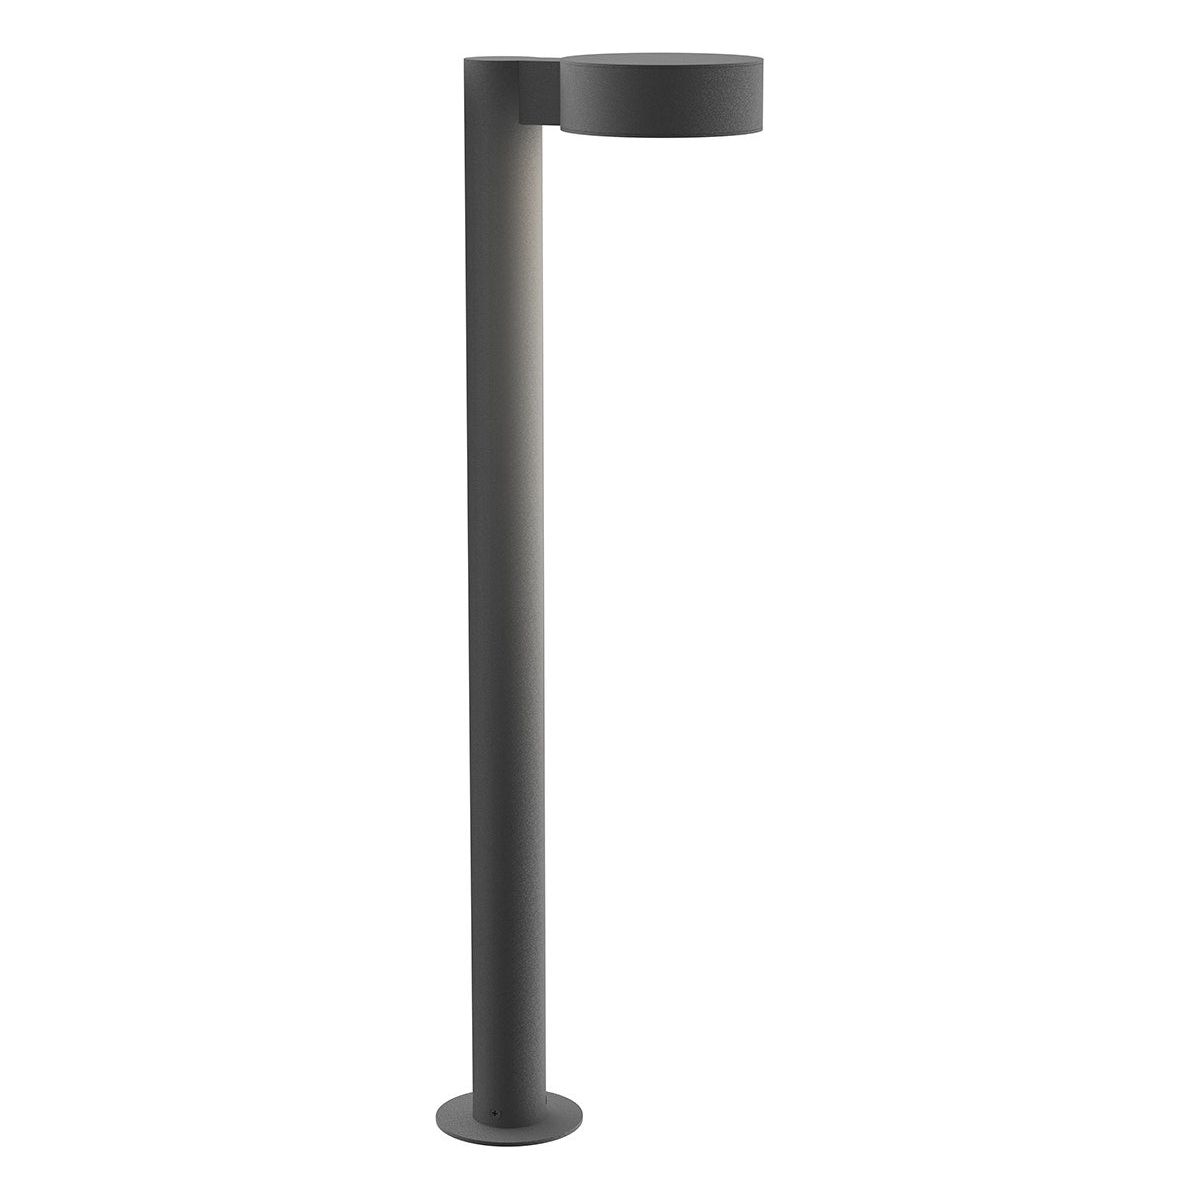 REALS 28" LED Bollard with Plate Cap and Plate Lens